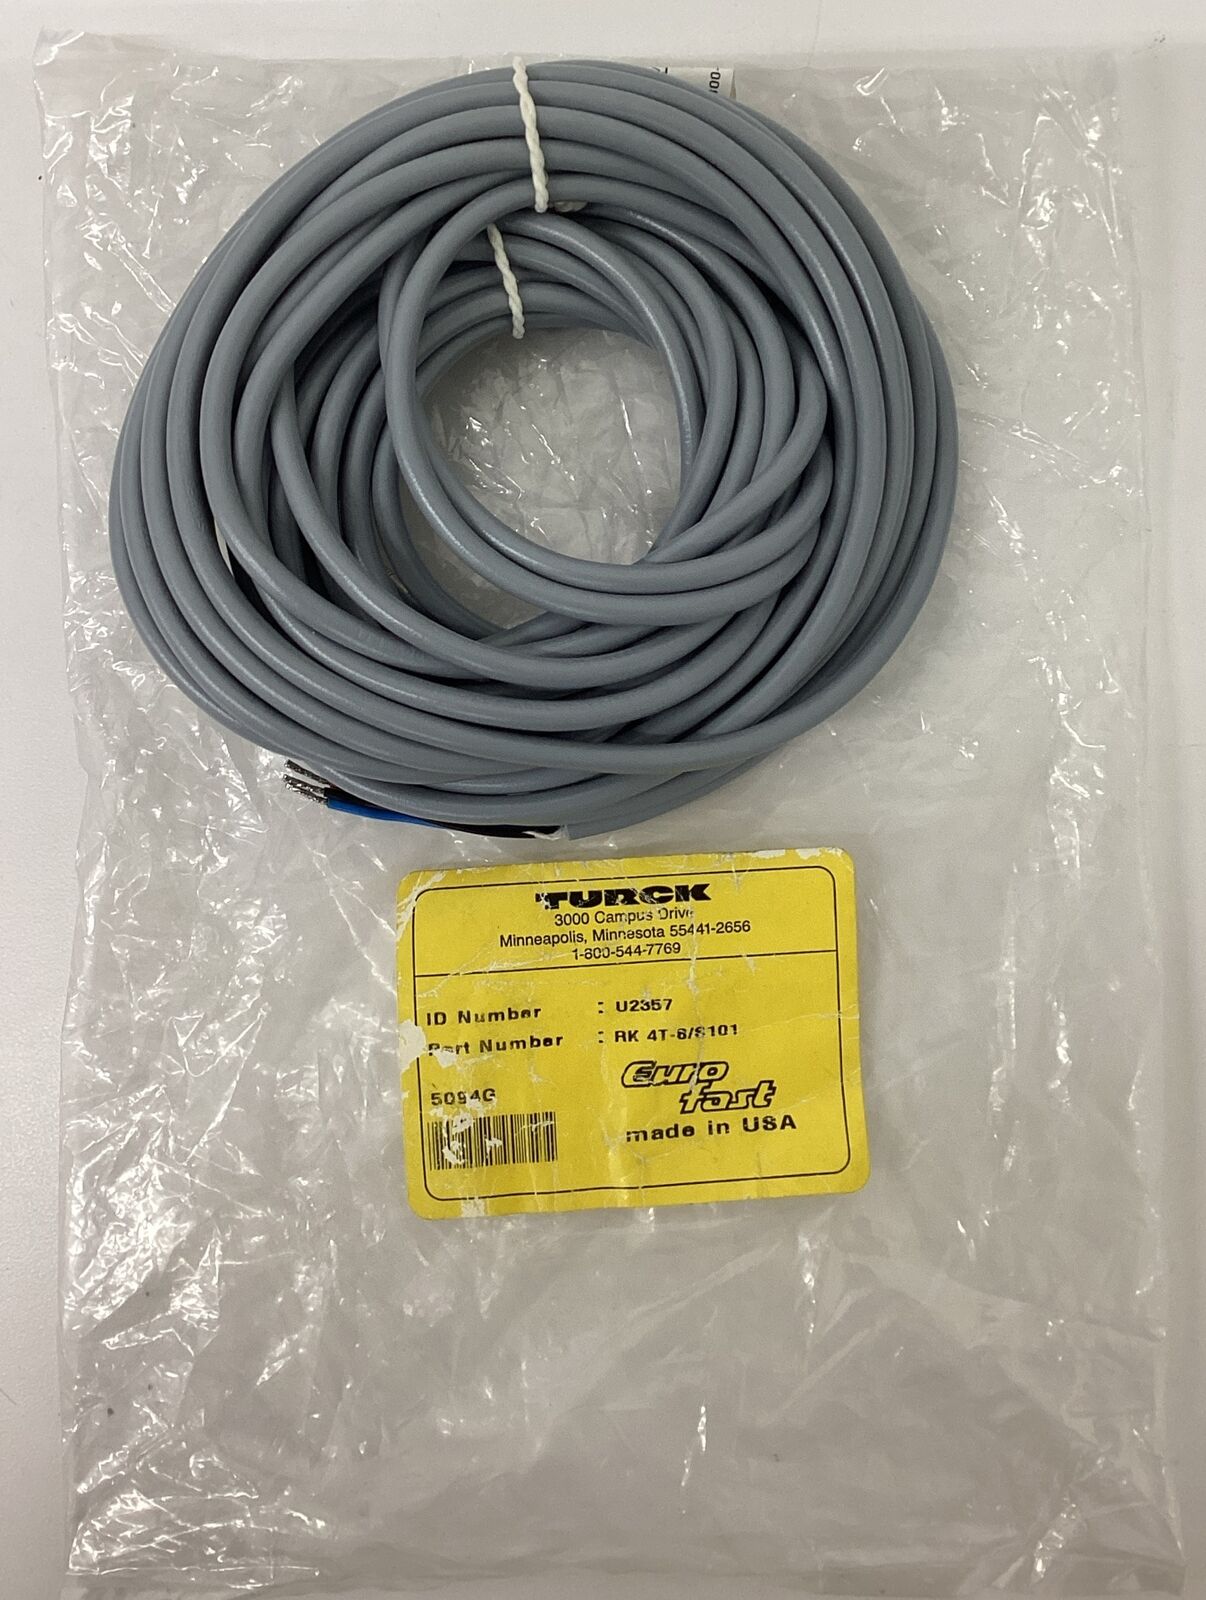 Turck RK4T-6/S101 / U2357 M12 3-Wire Straight Single End Cable 6M (CBL151)